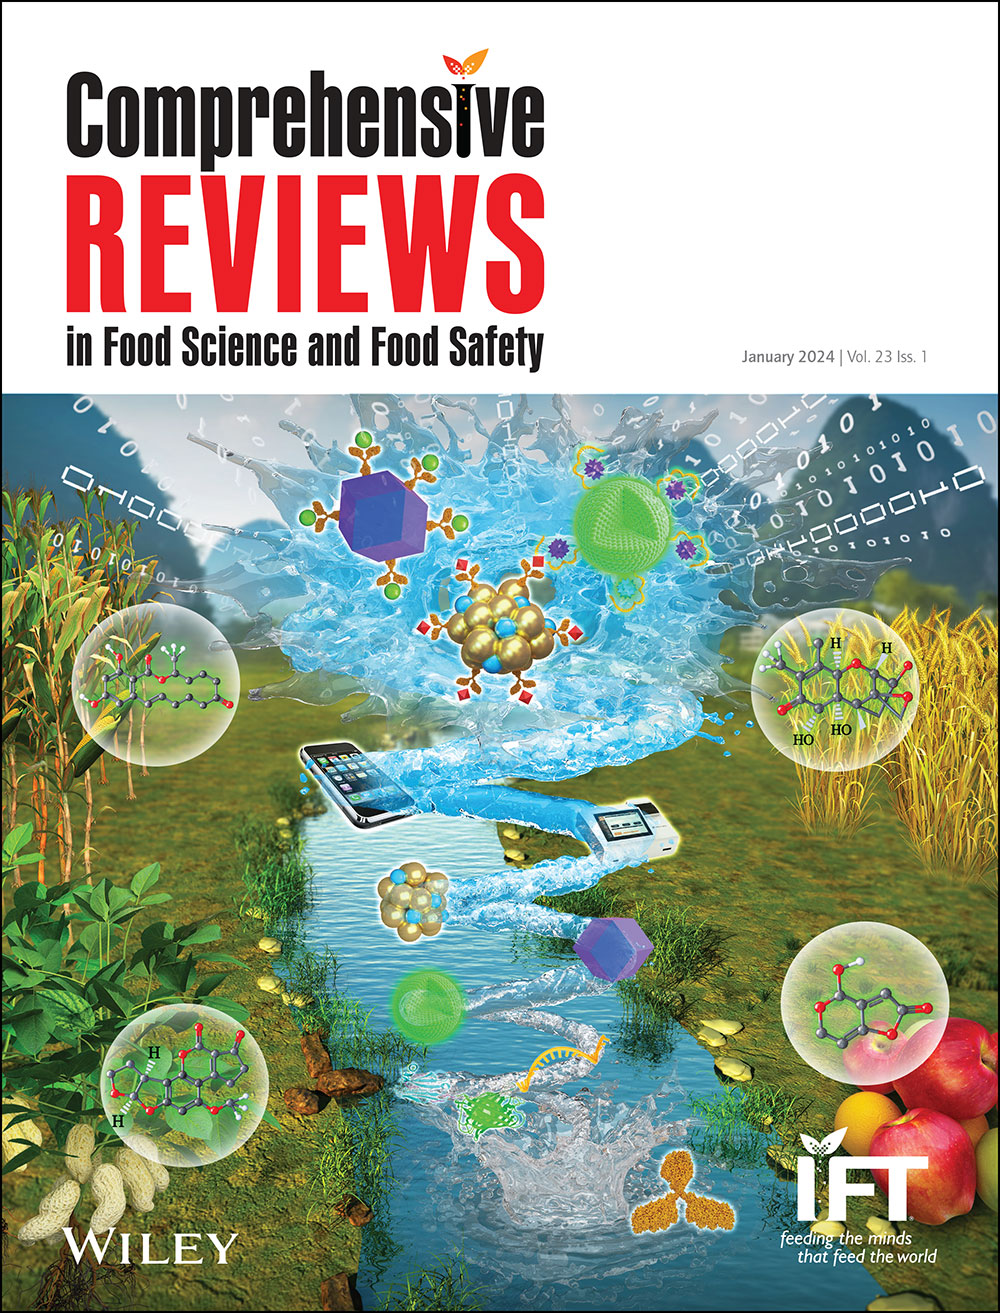 Comprehensive Reviews in Food Science and Food Safety